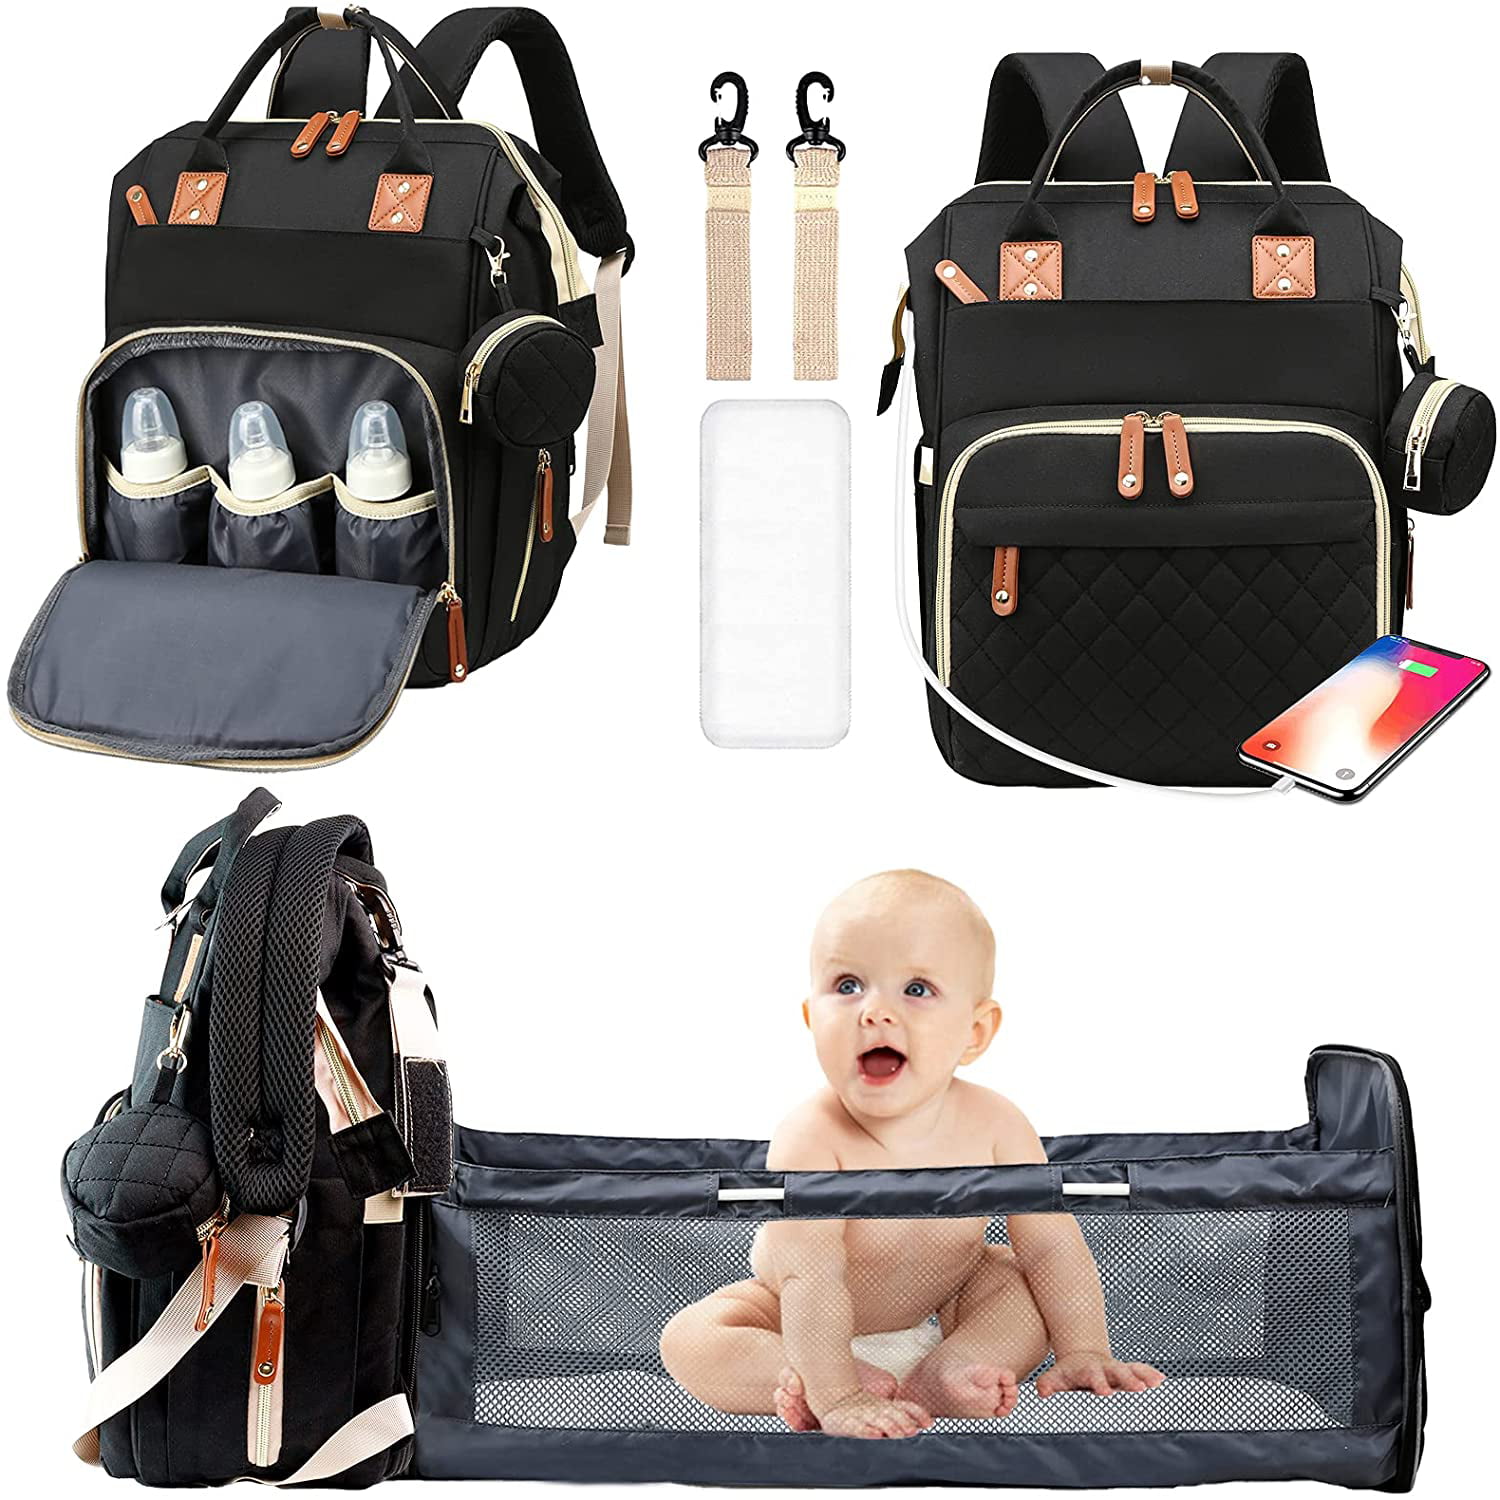 Jeraboo Diaper Backpack for Mom and Dad - Stylish Designer Diaper Bag - Includes Changing Pad, Large Roomy Pockets, Insulated Pouch